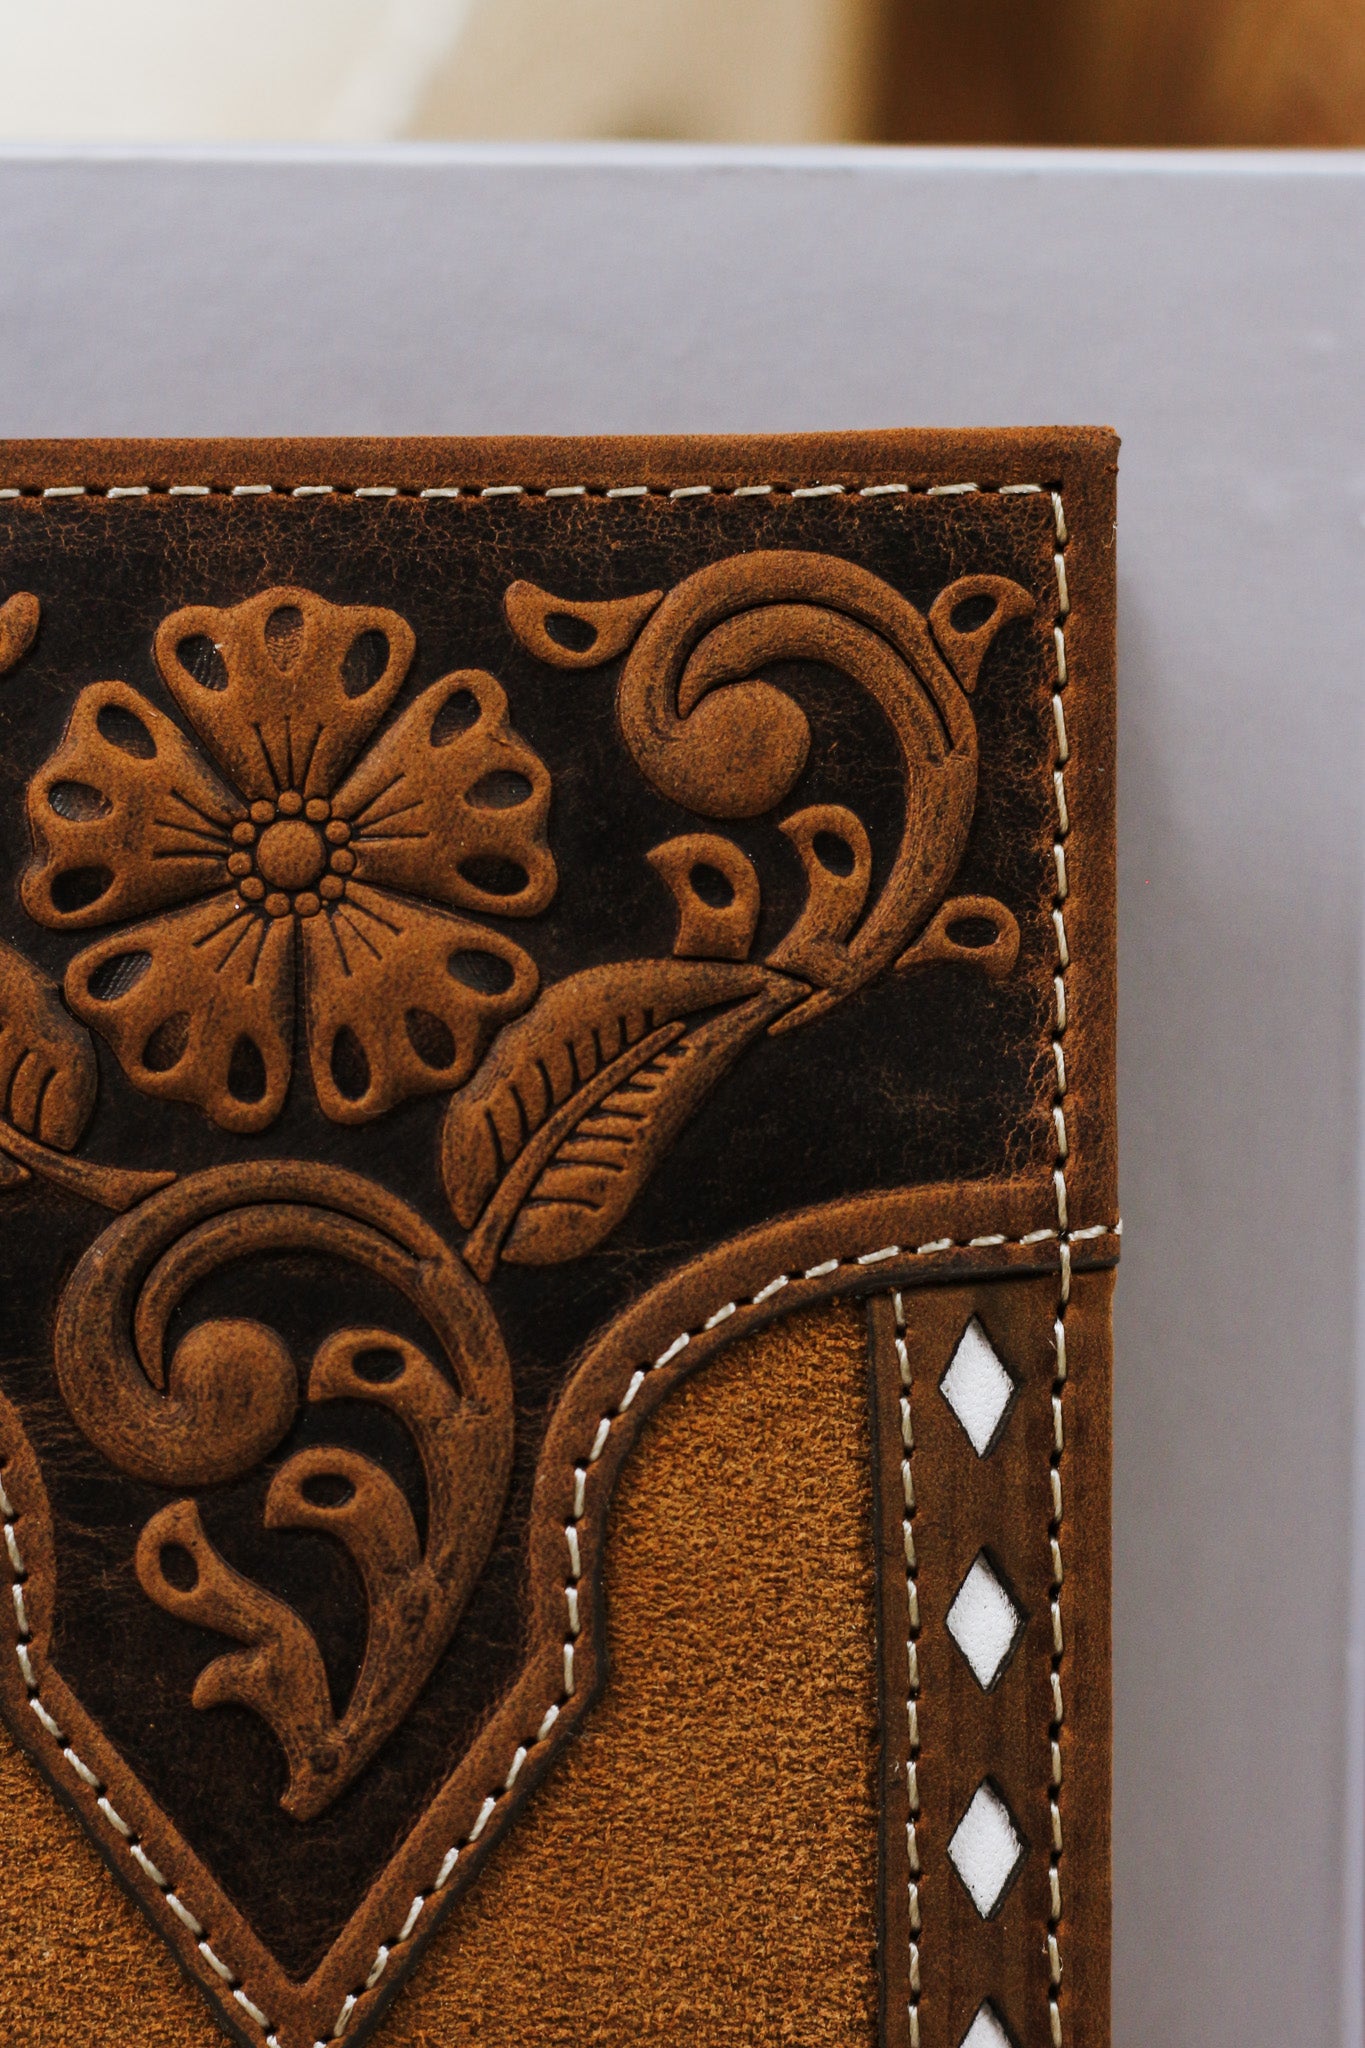 Nocona Rodeo Wallet Floral Embossed White Buck Lacing Tan